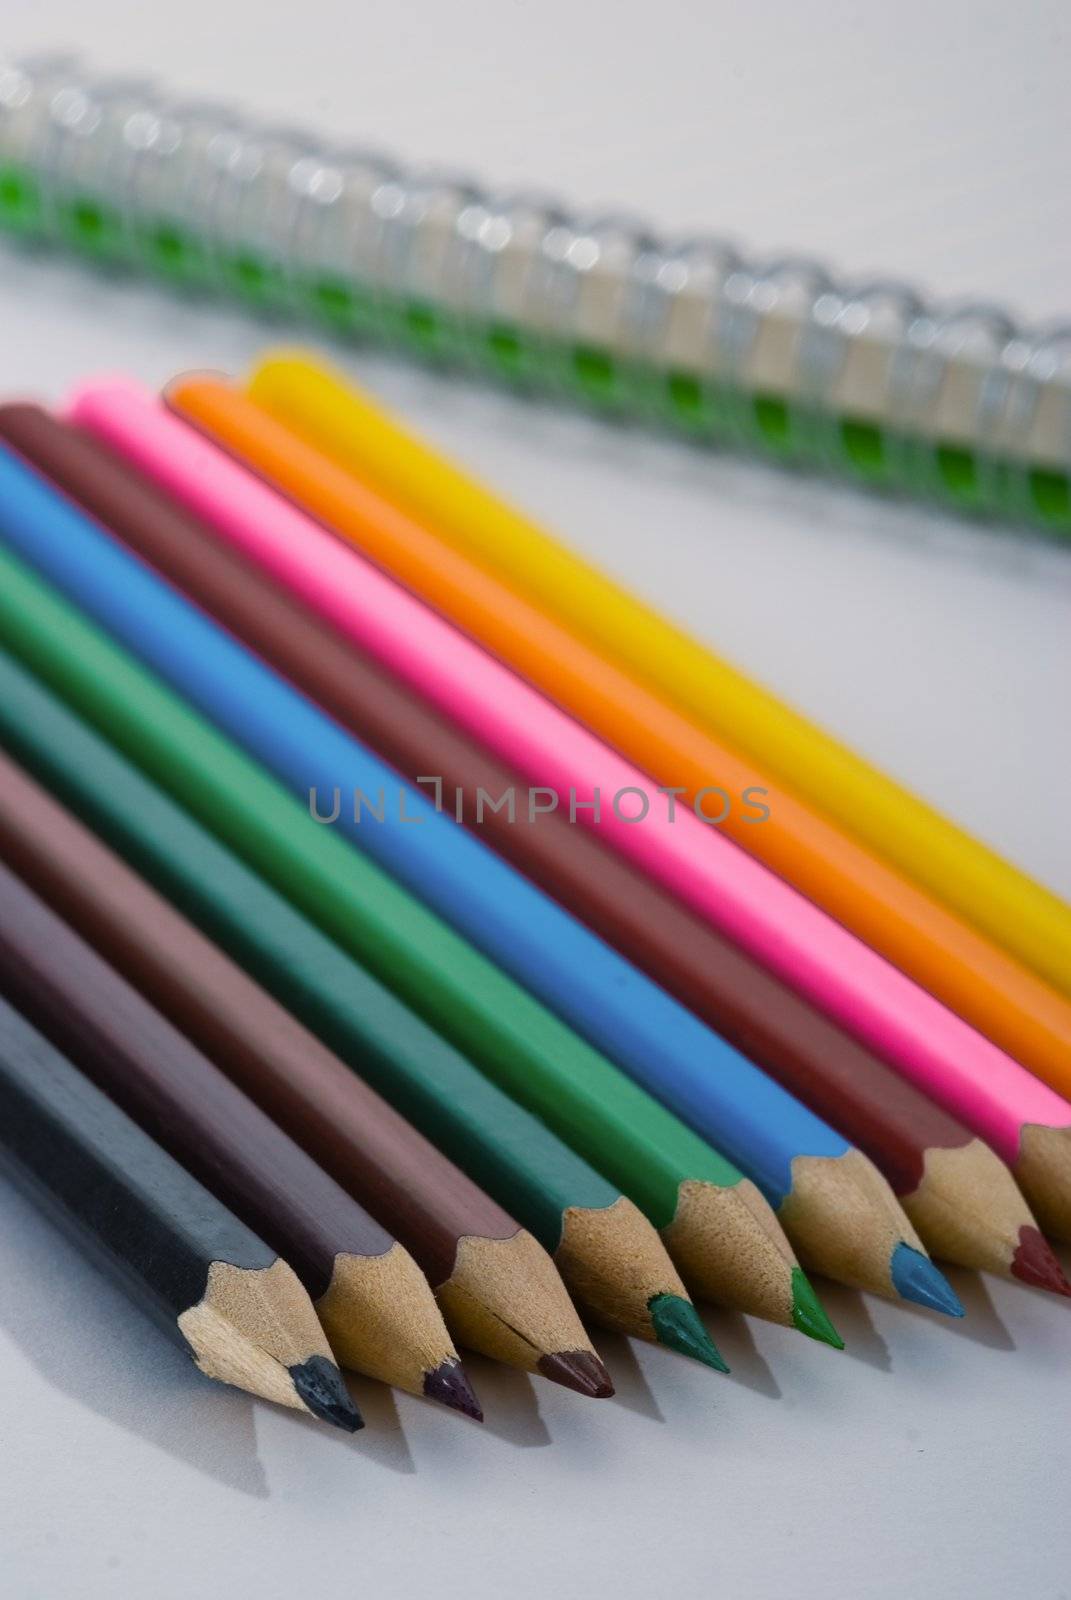 Colored crayons by pmisak